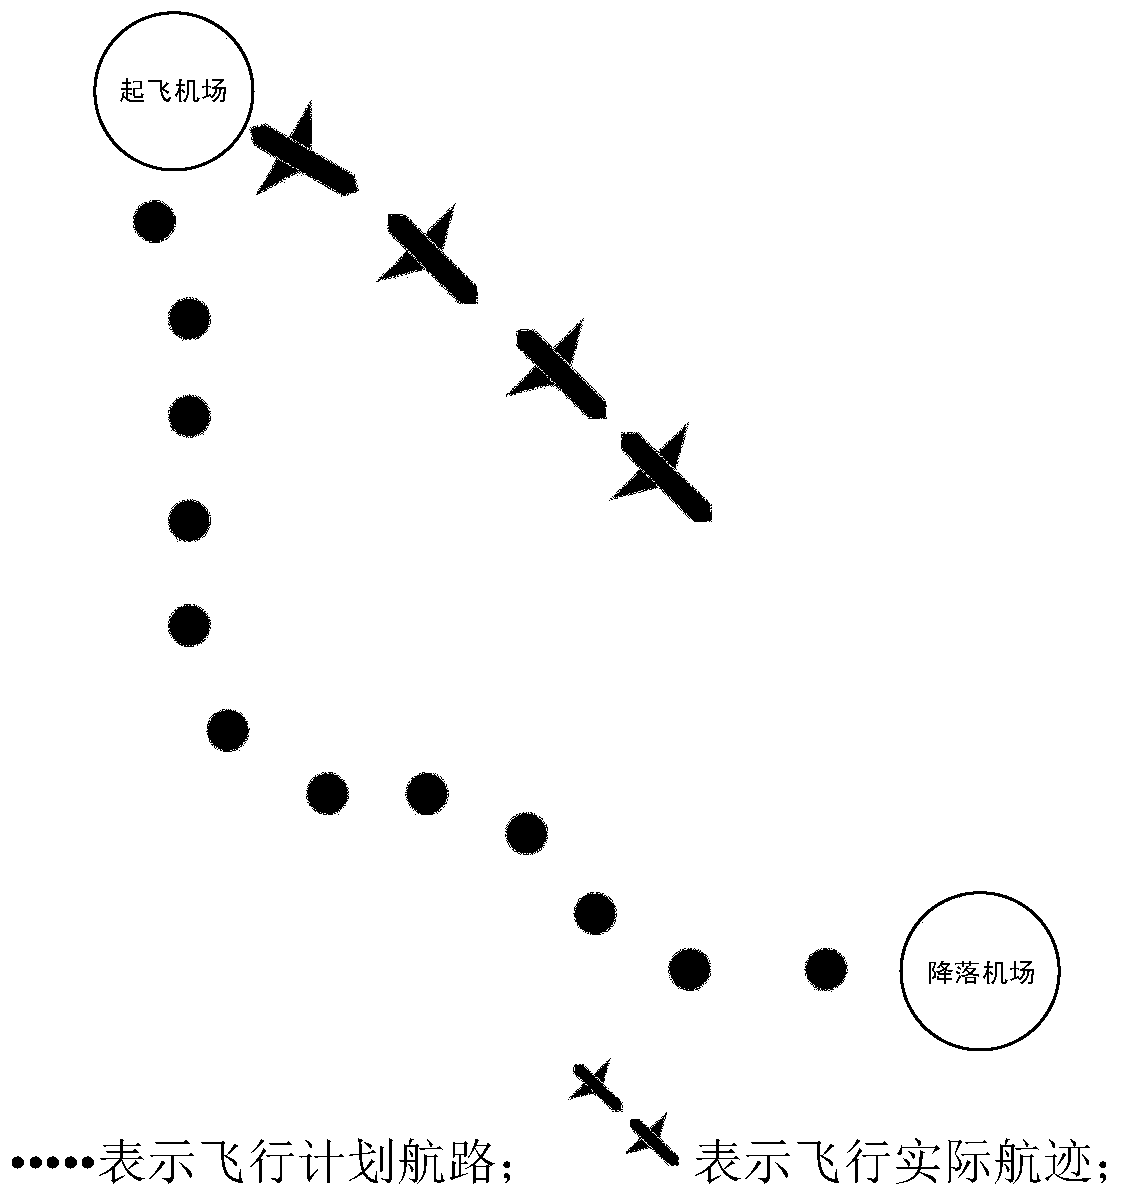 A method and device for online detection of flight deviation from normal track behavior